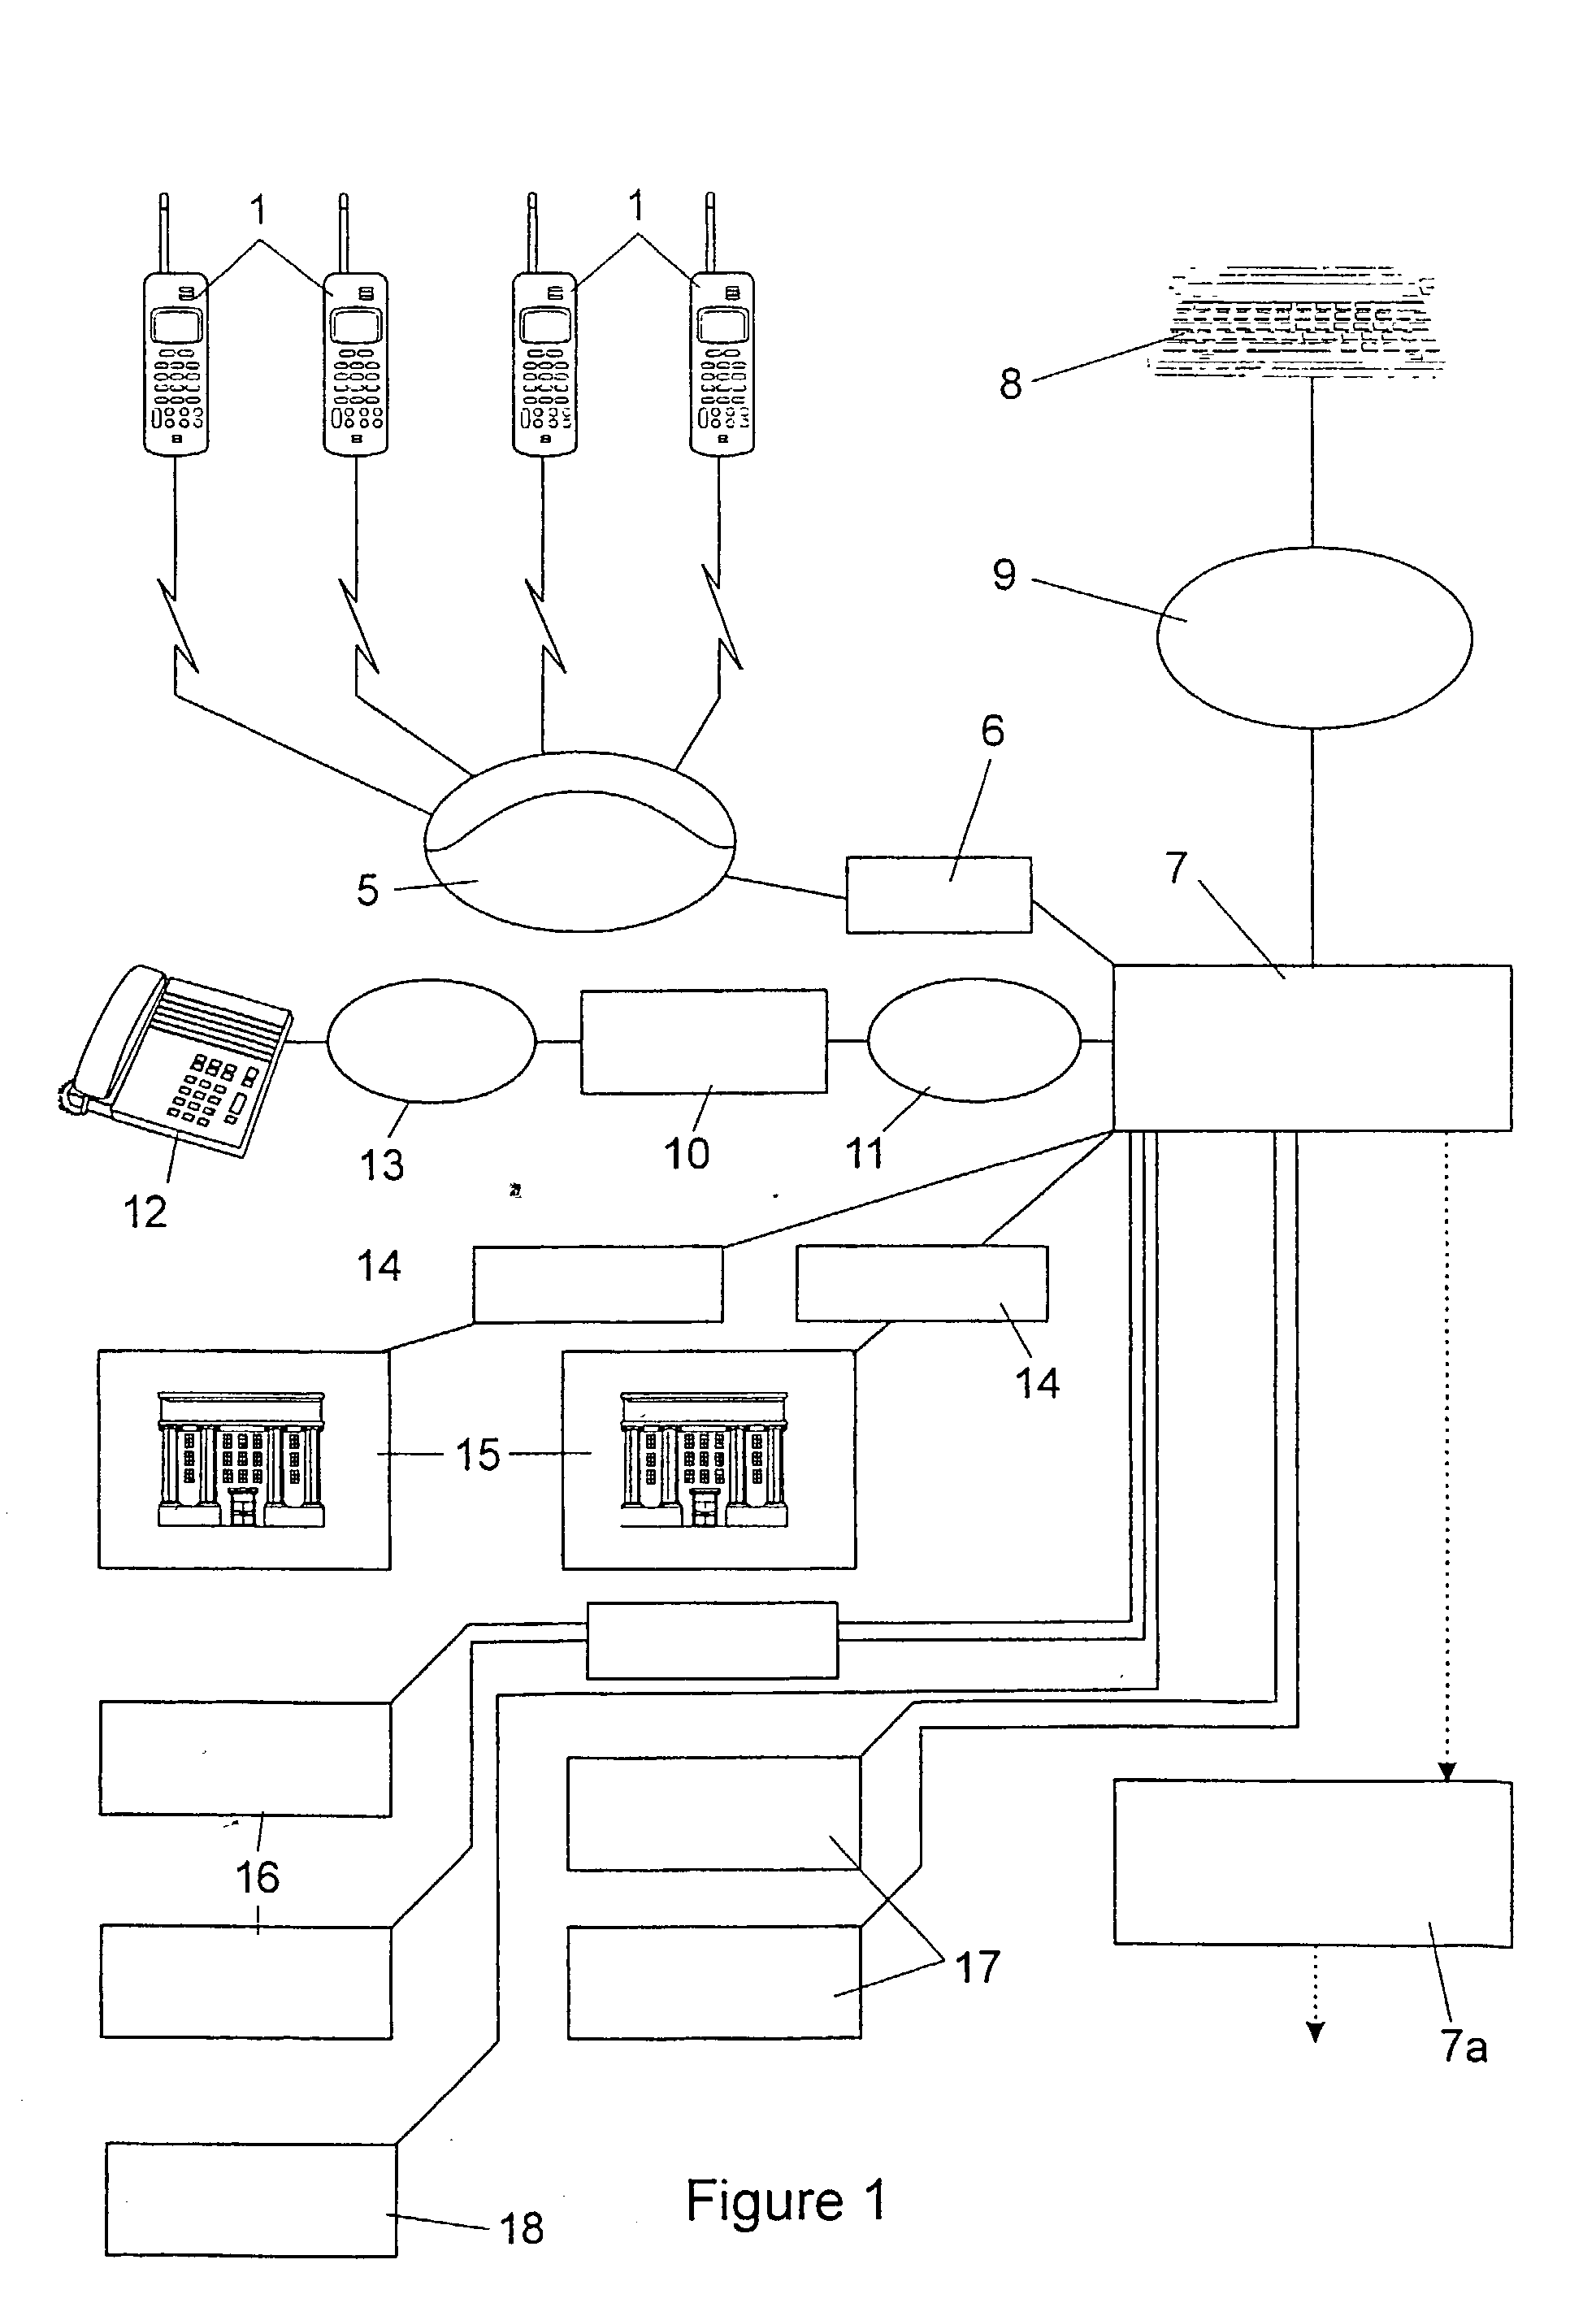 Banking system with enhanced identification of financial accounts